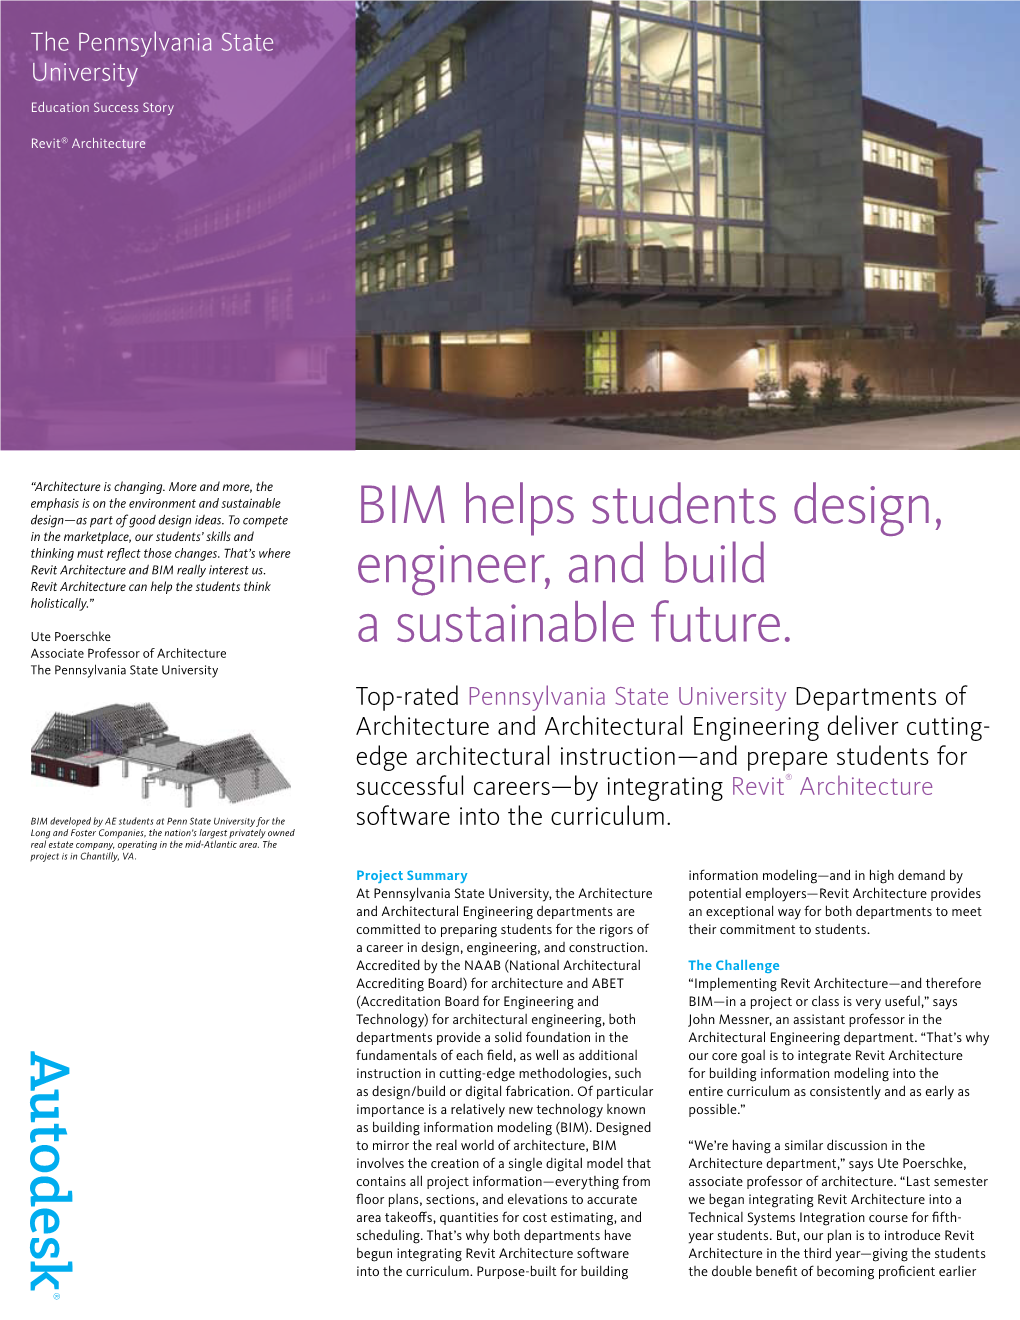 BIM Helps Students Design, Engineer, and Build a Sustainable Future